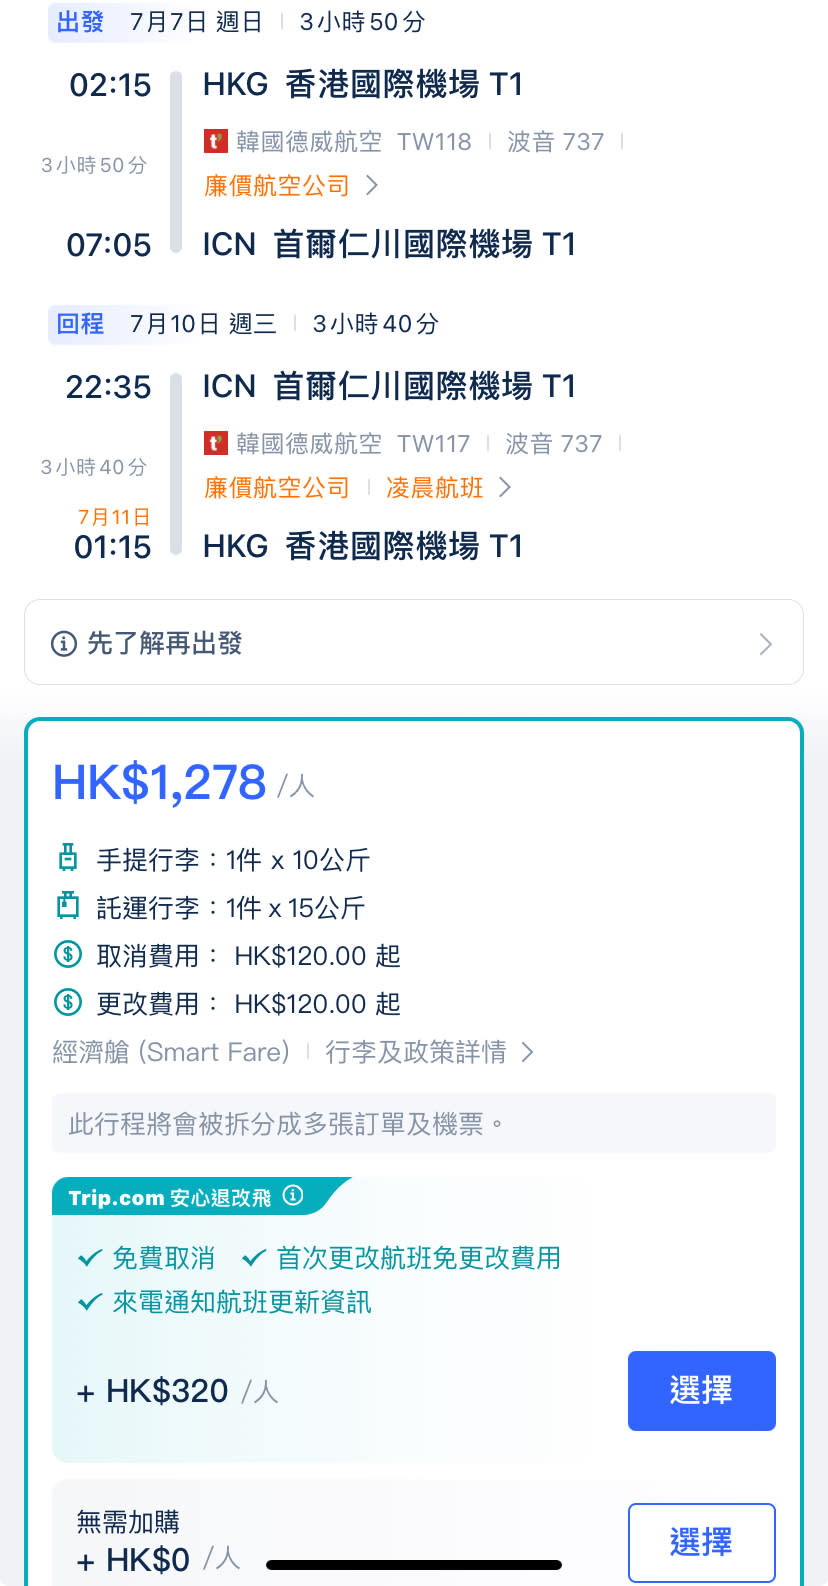 South Korea Air Tickets |  Jeju Air one-way flight to Seoul in July is as low as $350!Round trip including tax starts from $1,540 including 10kg hand luggage